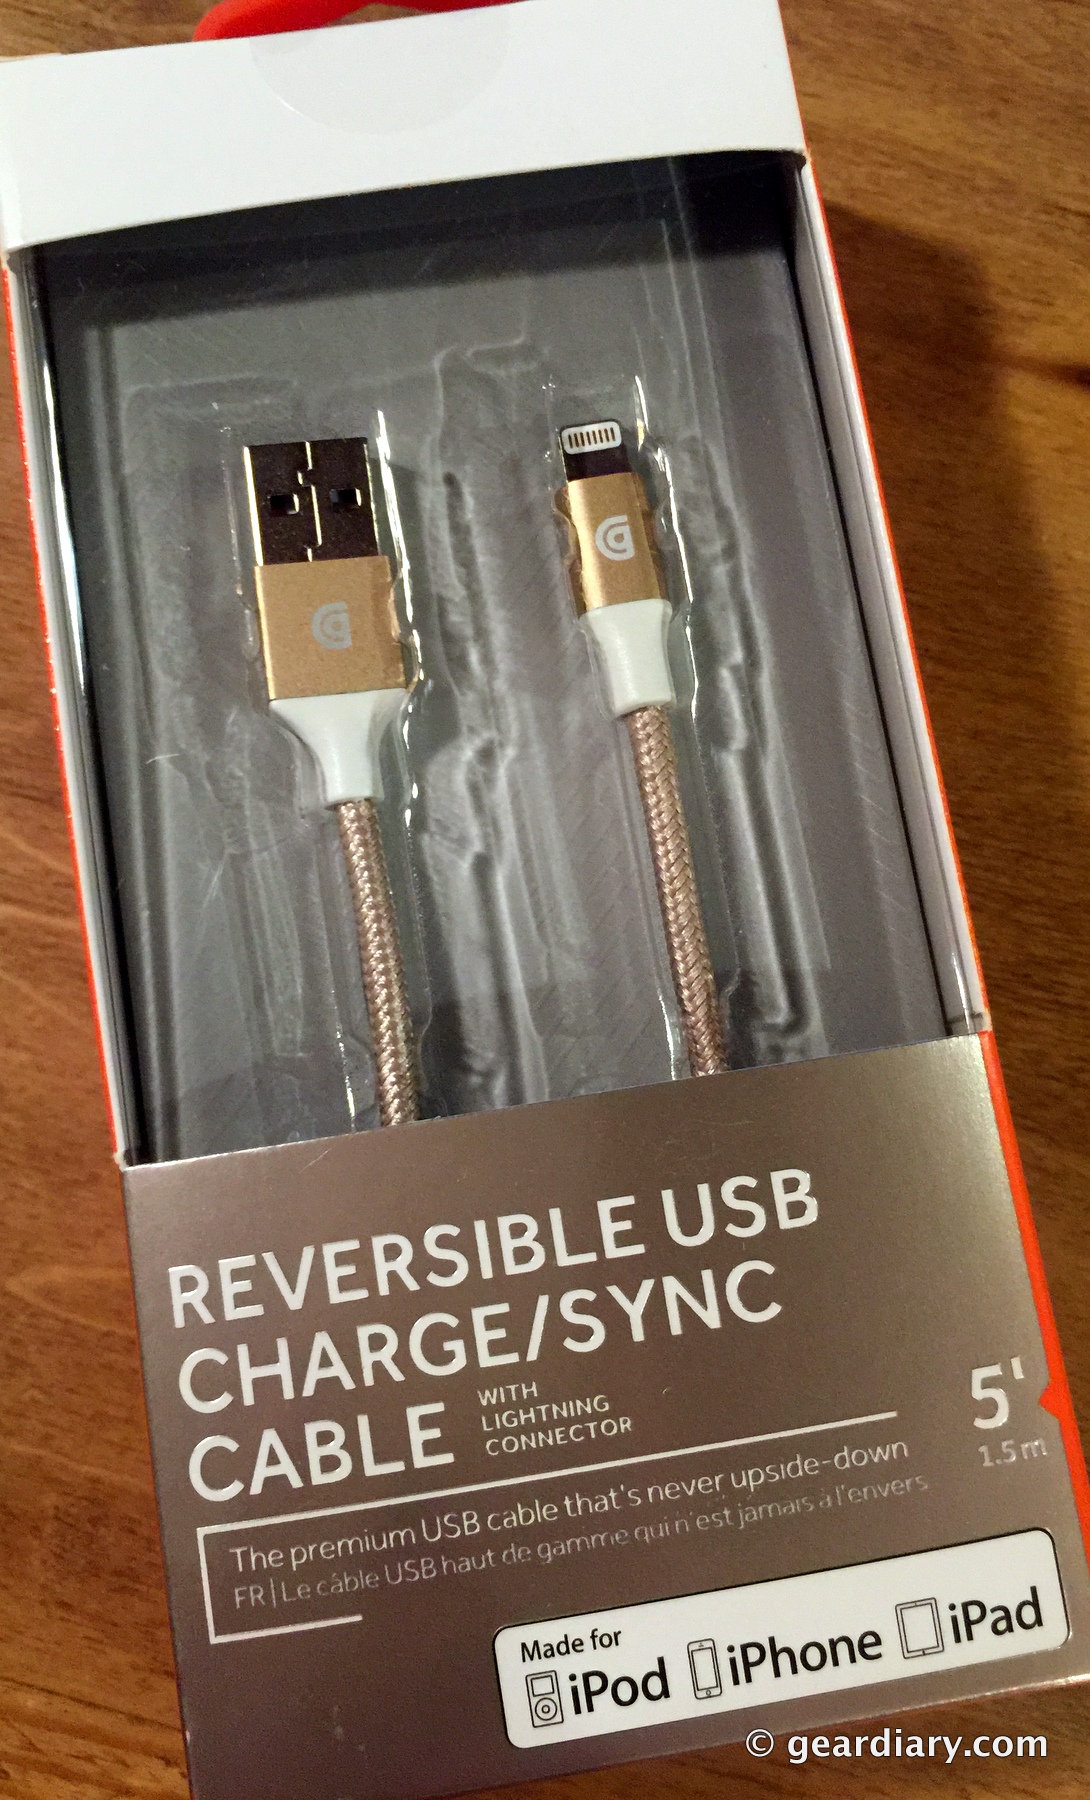 Griffin Reversible USB Charge Sync Cable: 5 Feet of Awesomeness